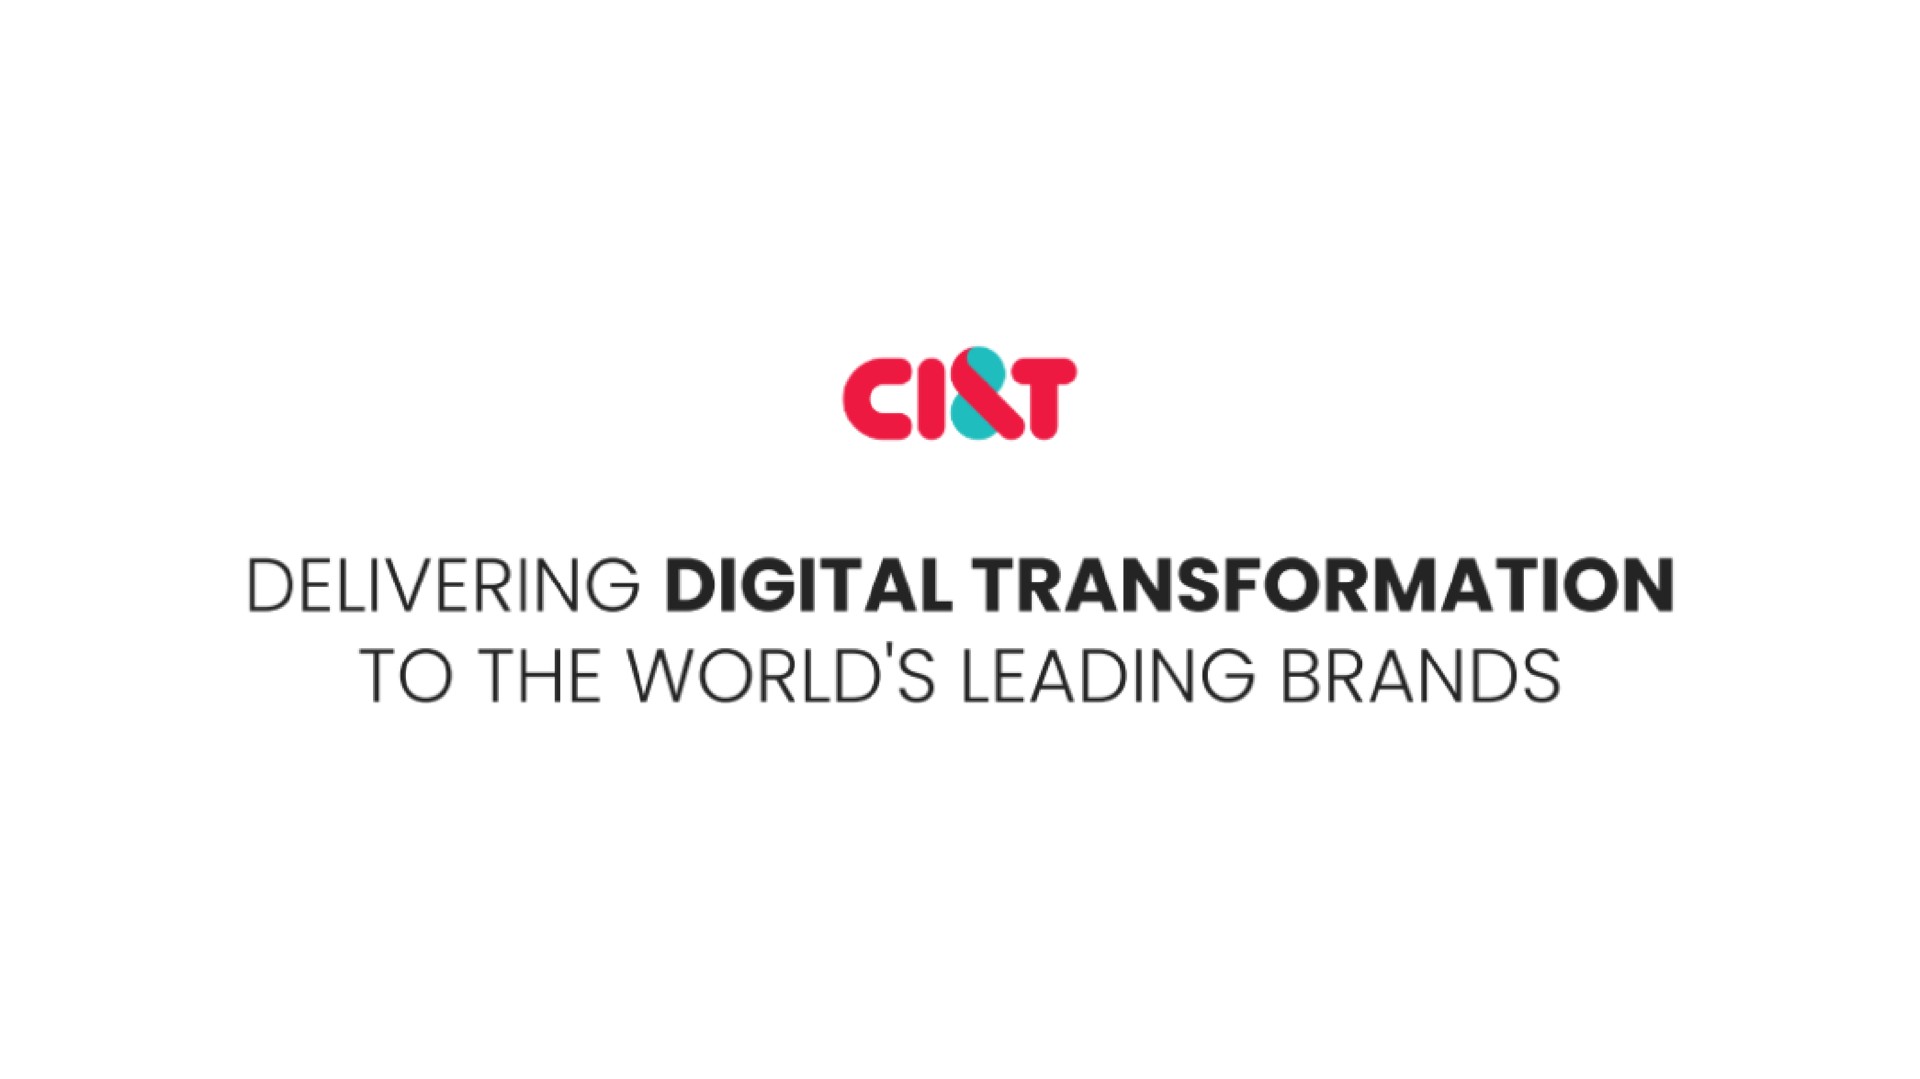 cist delivering digital transformation to the world leading brands | CI&T